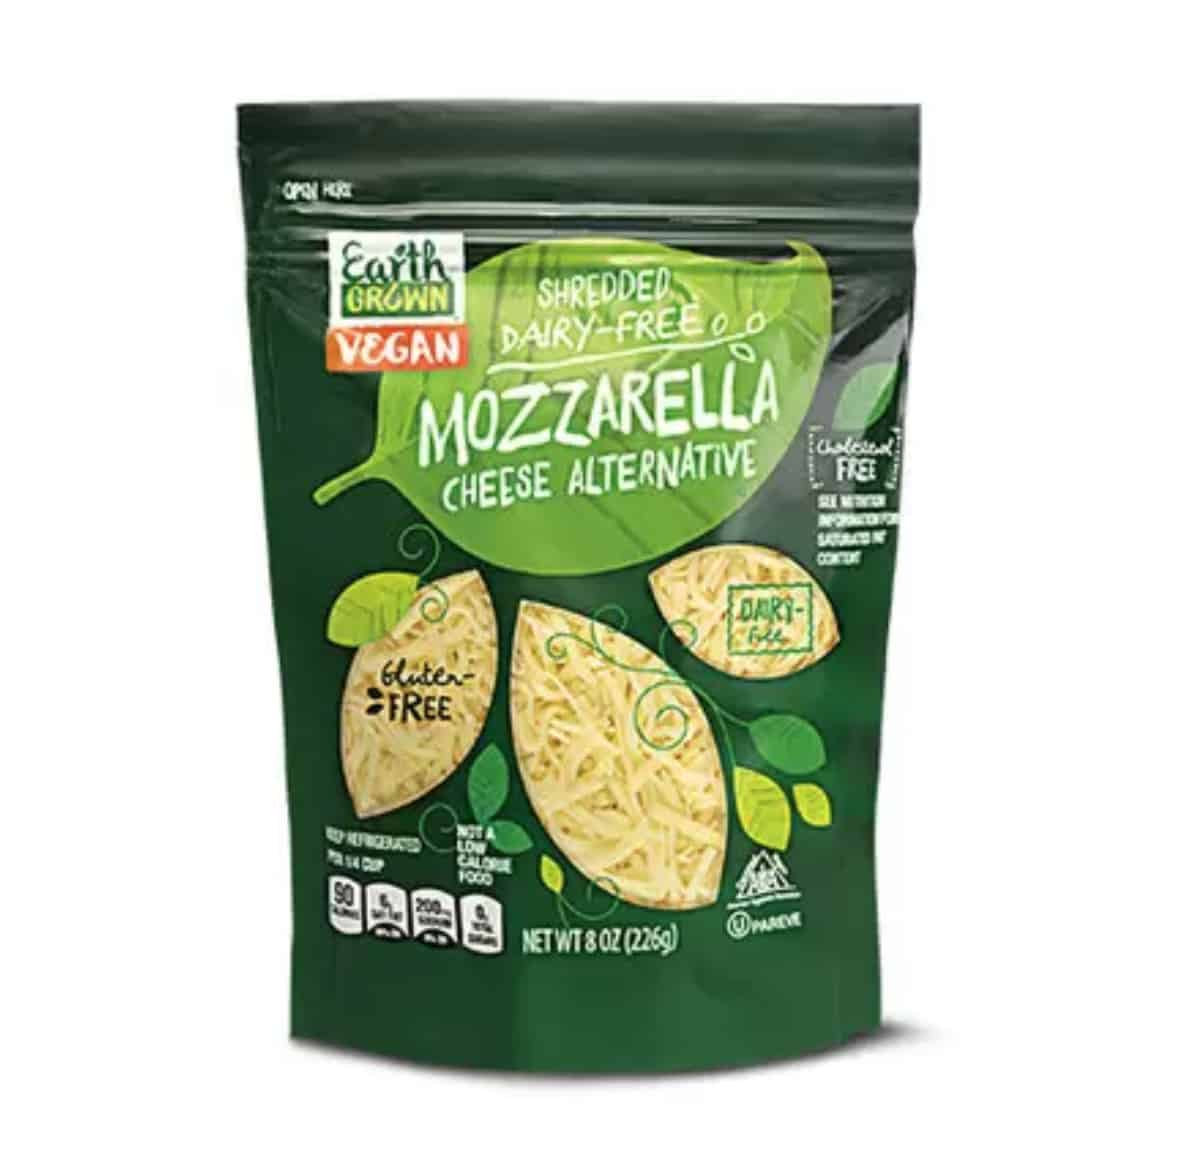 A dark green pouch of Earth Grown Dairy-Free Mozzarella cheese shreds by Aldi on a white background. 